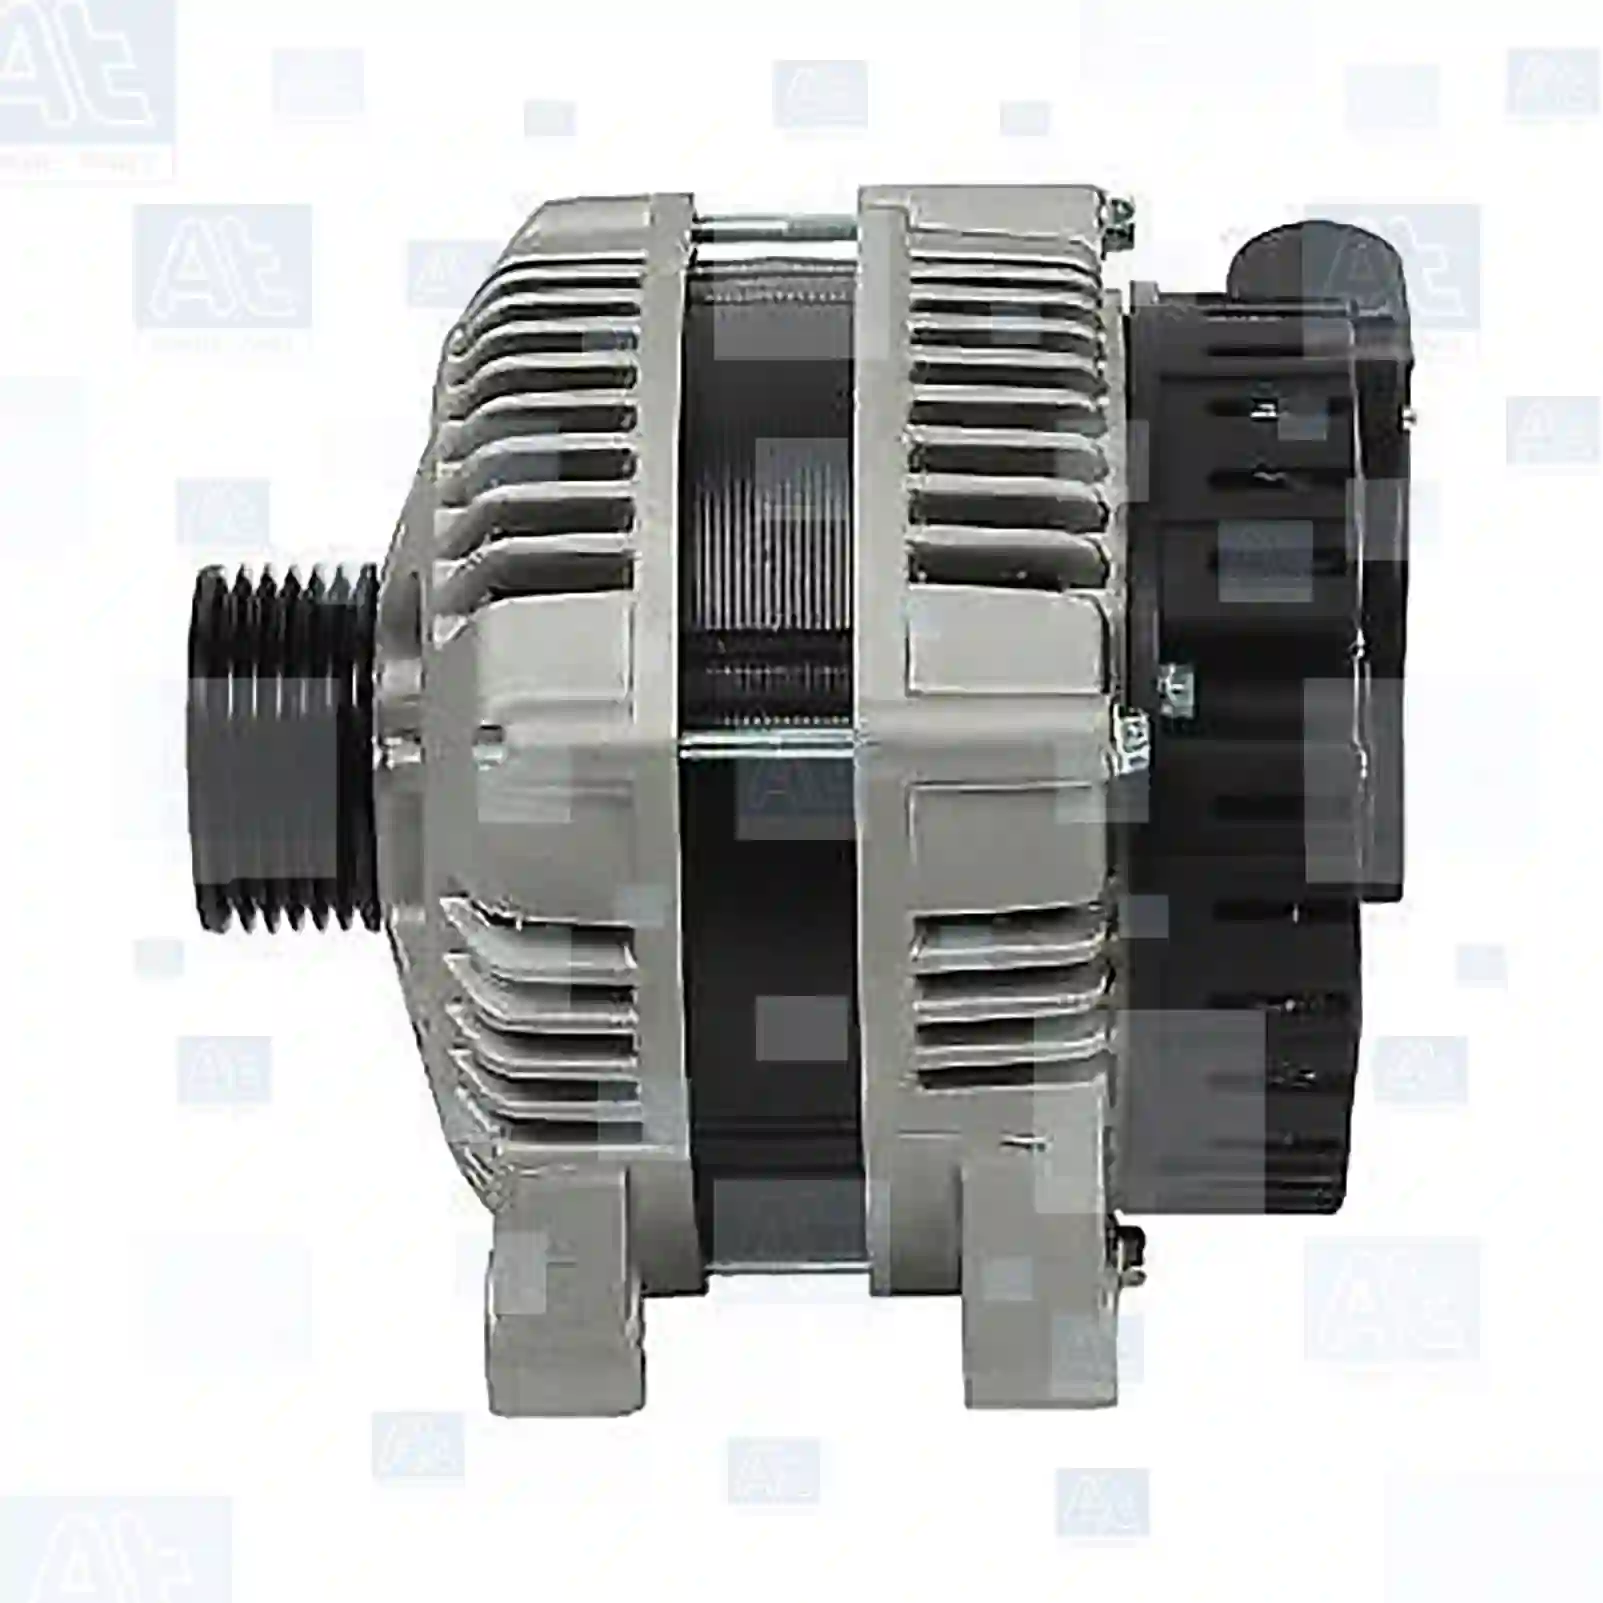 Alternator, 77711559, 57052F, 57054F, 57055H, 57055J, 5705GC, 9335342080, 9467560280, 9621791480, 9635342080, 9639362380, 9645907780, 9645907880, 1516481, 71716671, 71719943, 9621791480, 71716671, 71719943, 9467560280, 9621791480, 71716671, 71719943, 9621791480, SA180, 57052F, 57054F, 57055H, 57055J, 5705GC, 9335342080, 9467560280, 9621791480, 9635342080, 9639362380, 9645907780, 9645907880 ||  77711559 At Spare Part | Engine, Accelerator Pedal, Camshaft, Connecting Rod, Crankcase, Crankshaft, Cylinder Head, Engine Suspension Mountings, Exhaust Manifold, Exhaust Gas Recirculation, Filter Kits, Flywheel Housing, General Overhaul Kits, Engine, Intake Manifold, Oil Cleaner, Oil Cooler, Oil Filter, Oil Pump, Oil Sump, Piston & Liner, Sensor & Switch, Timing Case, Turbocharger, Cooling System, Belt Tensioner, Coolant Filter, Coolant Pipe, Corrosion Prevention Agent, Drive, Expansion Tank, Fan, Intercooler, Monitors & Gauges, Radiator, Thermostat, V-Belt / Timing belt, Water Pump, Fuel System, Electronical Injector Unit, Feed Pump, Fuel Filter, cpl., Fuel Gauge Sender,  Fuel Line, Fuel Pump, Fuel Tank, Injection Line Kit, Injection Pump, Exhaust System, Clutch & Pedal, Gearbox, Propeller Shaft, Axles, Brake System, Hubs & Wheels, Suspension, Leaf Spring, Universal Parts / Accessories, Steering, Electrical System, Cabin Alternator, 77711559, 57052F, 57054F, 57055H, 57055J, 5705GC, 9335342080, 9467560280, 9621791480, 9635342080, 9639362380, 9645907780, 9645907880, 1516481, 71716671, 71719943, 9621791480, 71716671, 71719943, 9467560280, 9621791480, 71716671, 71719943, 9621791480, SA180, 57052F, 57054F, 57055H, 57055J, 5705GC, 9335342080, 9467560280, 9621791480, 9635342080, 9639362380, 9645907780, 9645907880 ||  77711559 At Spare Part | Engine, Accelerator Pedal, Camshaft, Connecting Rod, Crankcase, Crankshaft, Cylinder Head, Engine Suspension Mountings, Exhaust Manifold, Exhaust Gas Recirculation, Filter Kits, Flywheel Housing, General Overhaul Kits, Engine, Intake Manifold, Oil Cleaner, Oil Cooler, Oil Filter, Oil Pump, Oil Sump, Piston & Liner, Sensor & Switch, Timing Case, Turbocharger, Cooling System, Belt Tensioner, Coolant Filter, Coolant Pipe, Corrosion Prevention Agent, Drive, Expansion Tank, Fan, Intercooler, Monitors & Gauges, Radiator, Thermostat, V-Belt / Timing belt, Water Pump, Fuel System, Electronical Injector Unit, Feed Pump, Fuel Filter, cpl., Fuel Gauge Sender,  Fuel Line, Fuel Pump, Fuel Tank, Injection Line Kit, Injection Pump, Exhaust System, Clutch & Pedal, Gearbox, Propeller Shaft, Axles, Brake System, Hubs & Wheels, Suspension, Leaf Spring, Universal Parts / Accessories, Steering, Electrical System, Cabin